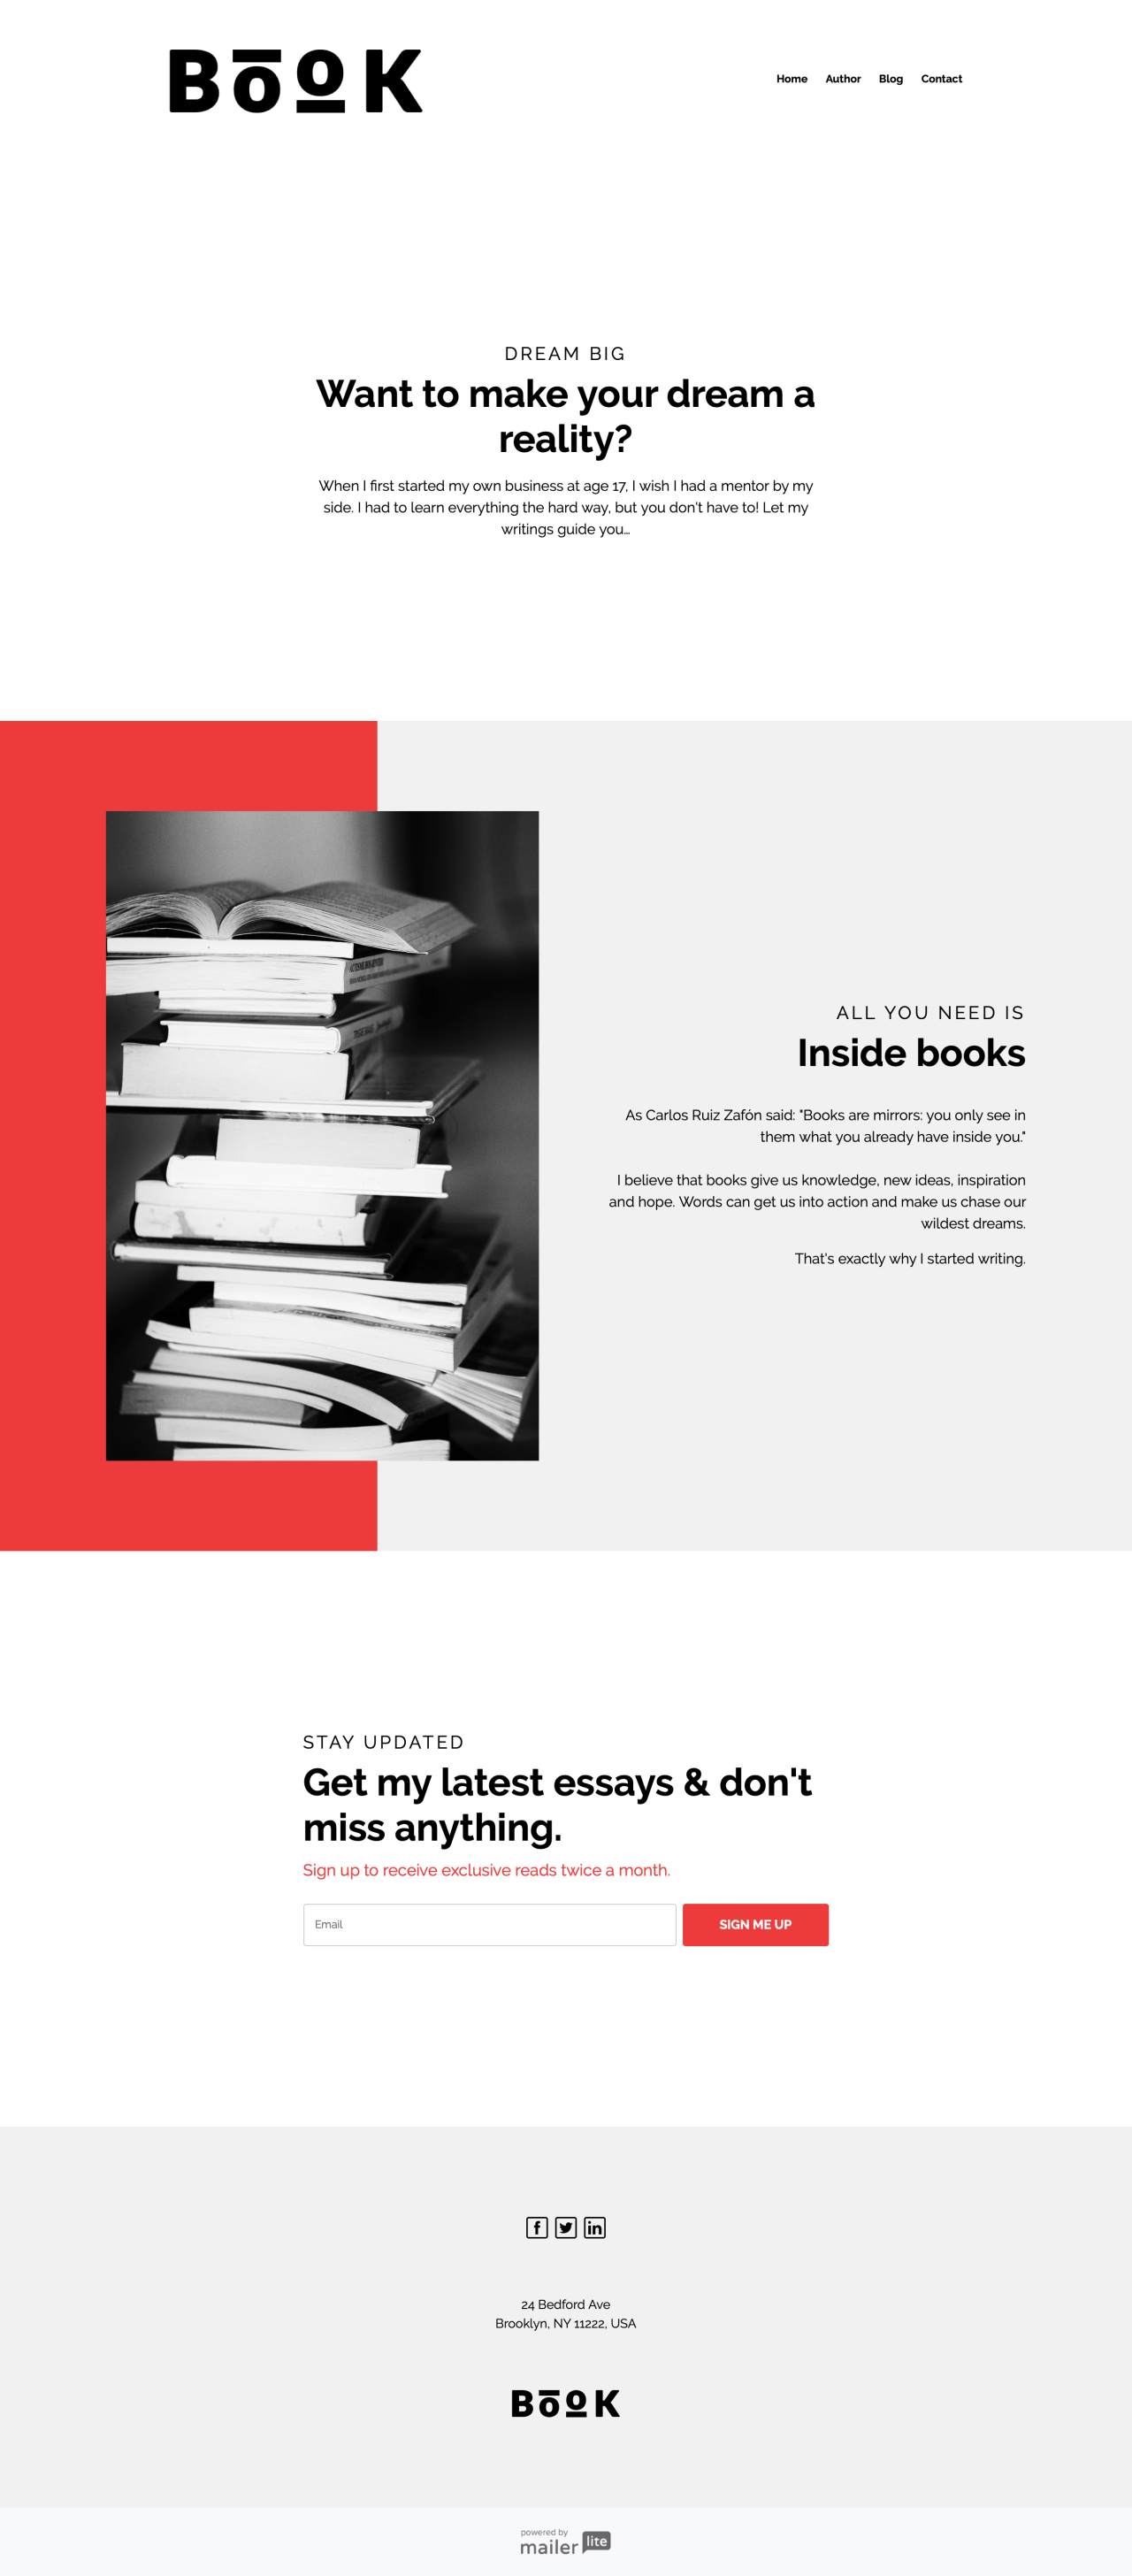 Author book example - Made with MailerLite